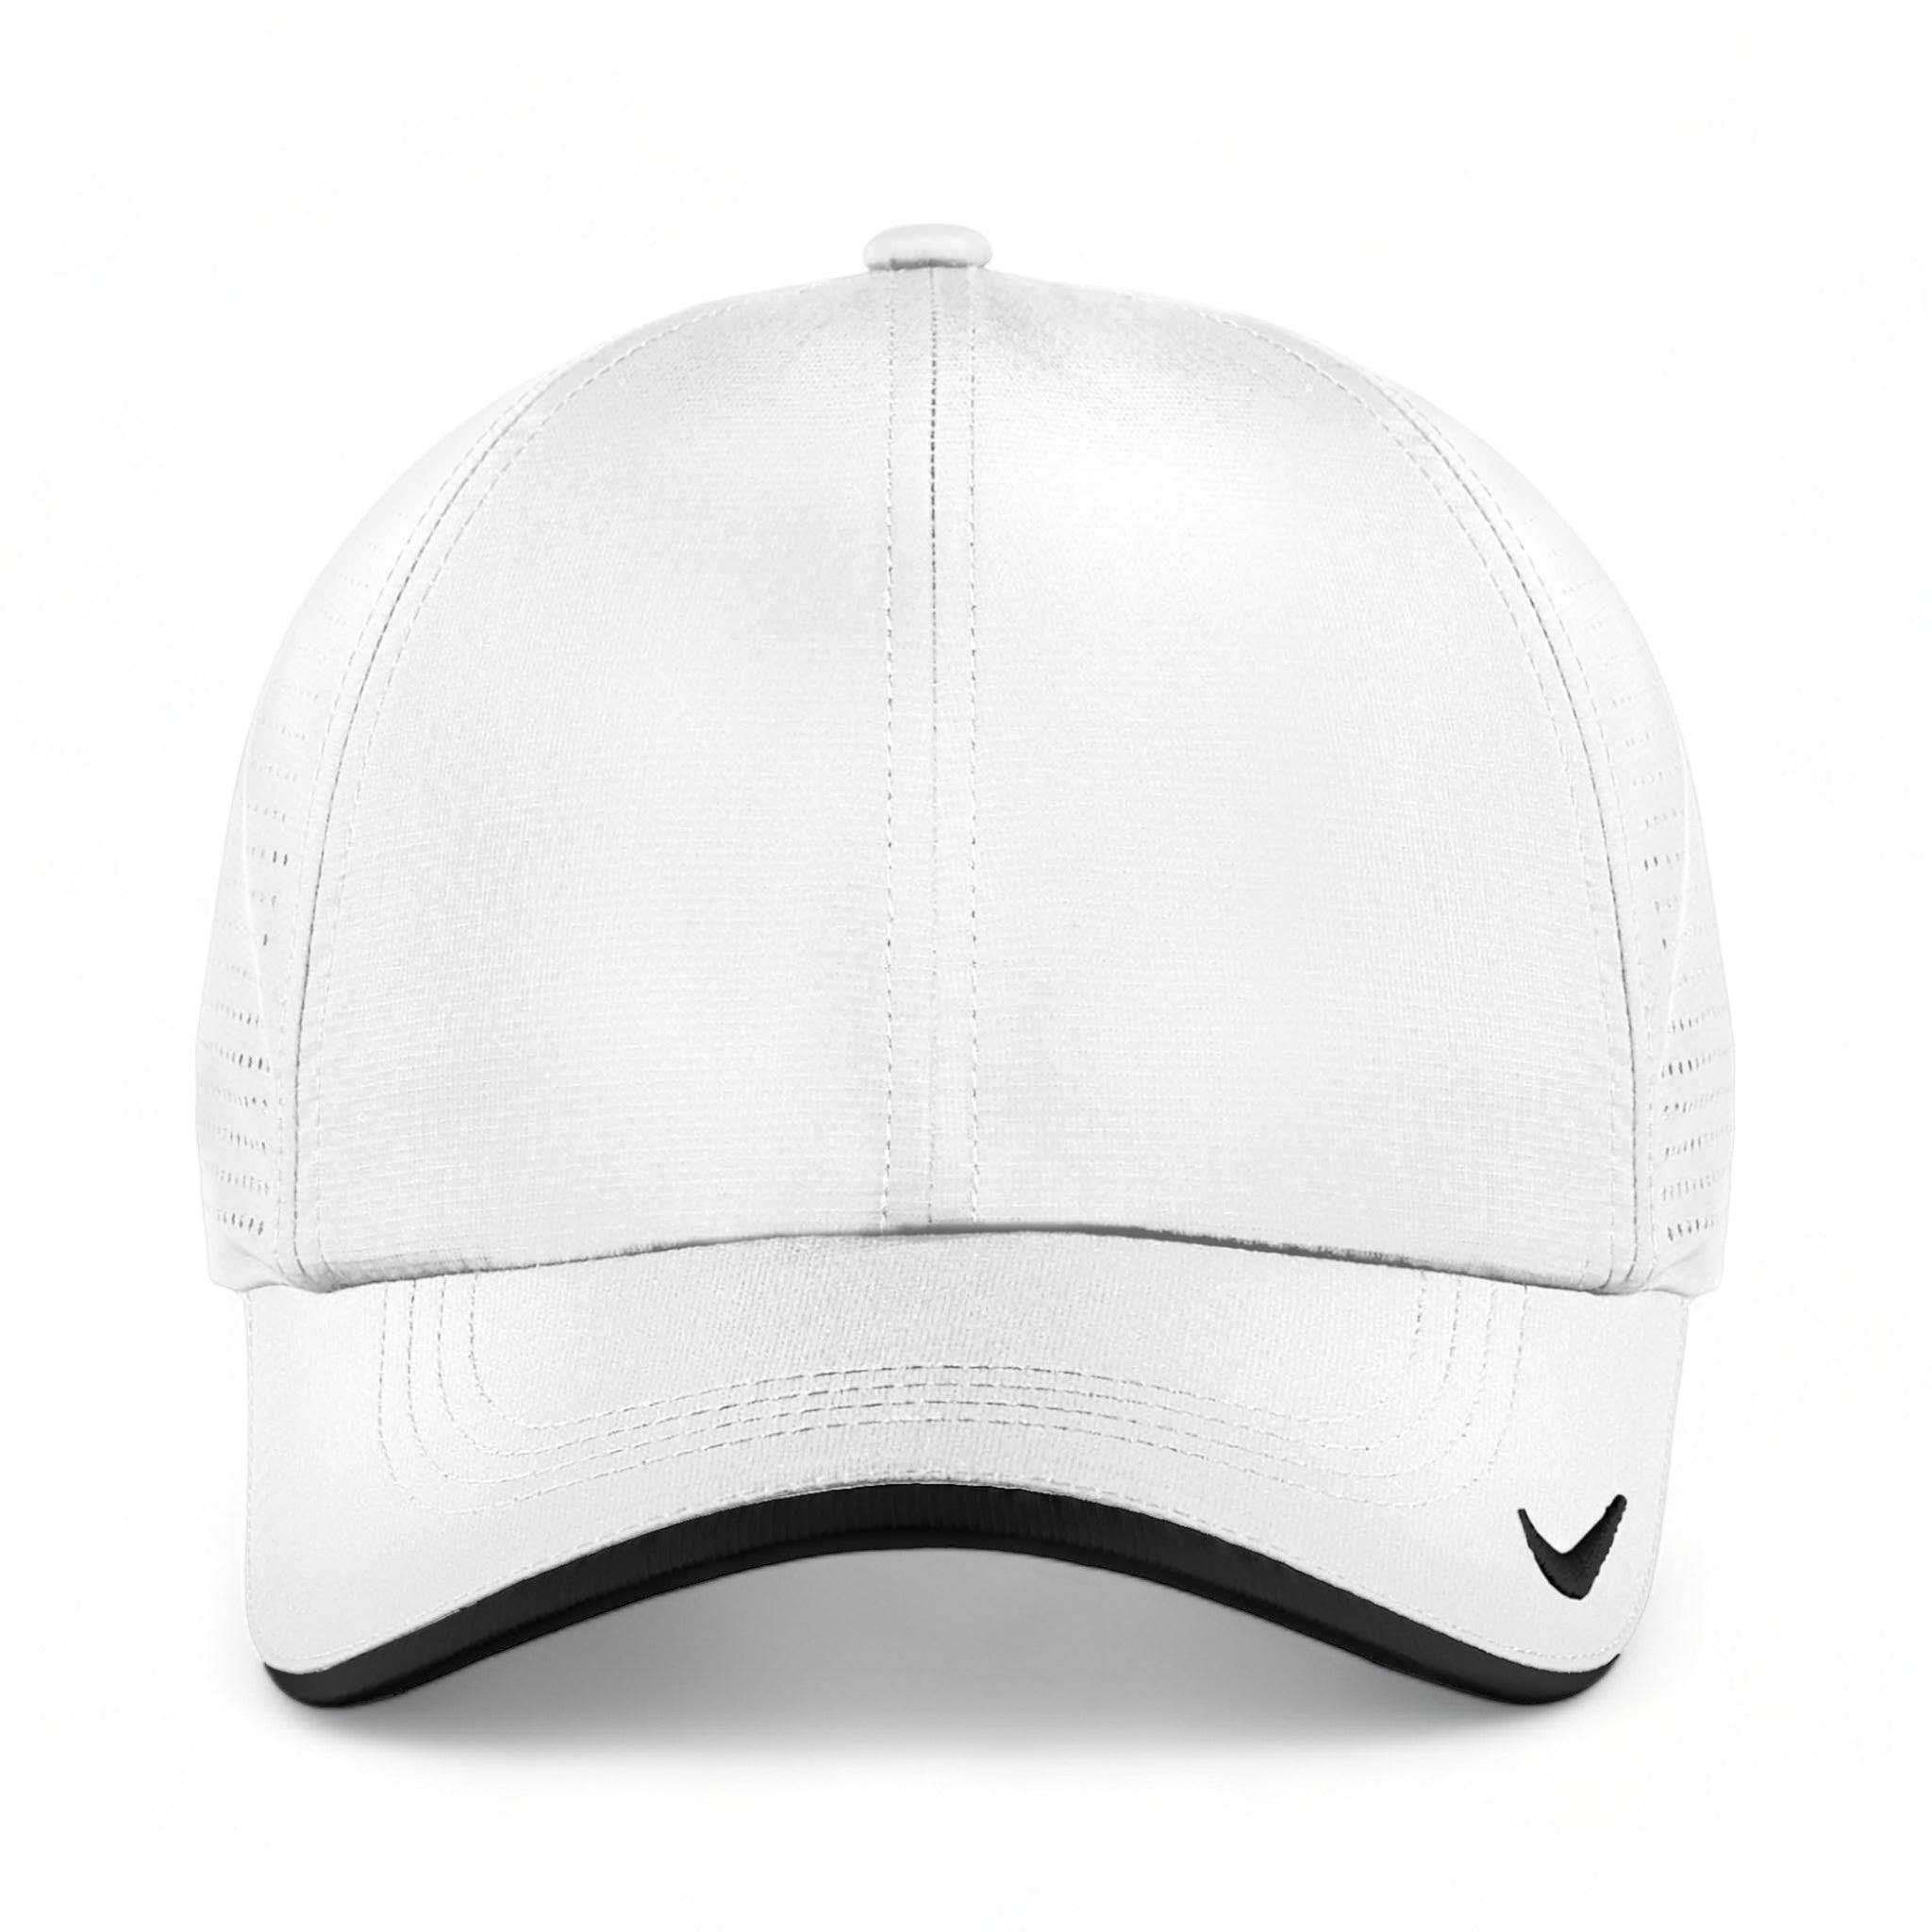 Front view of Nike NKFB6445 custom hat in white and black